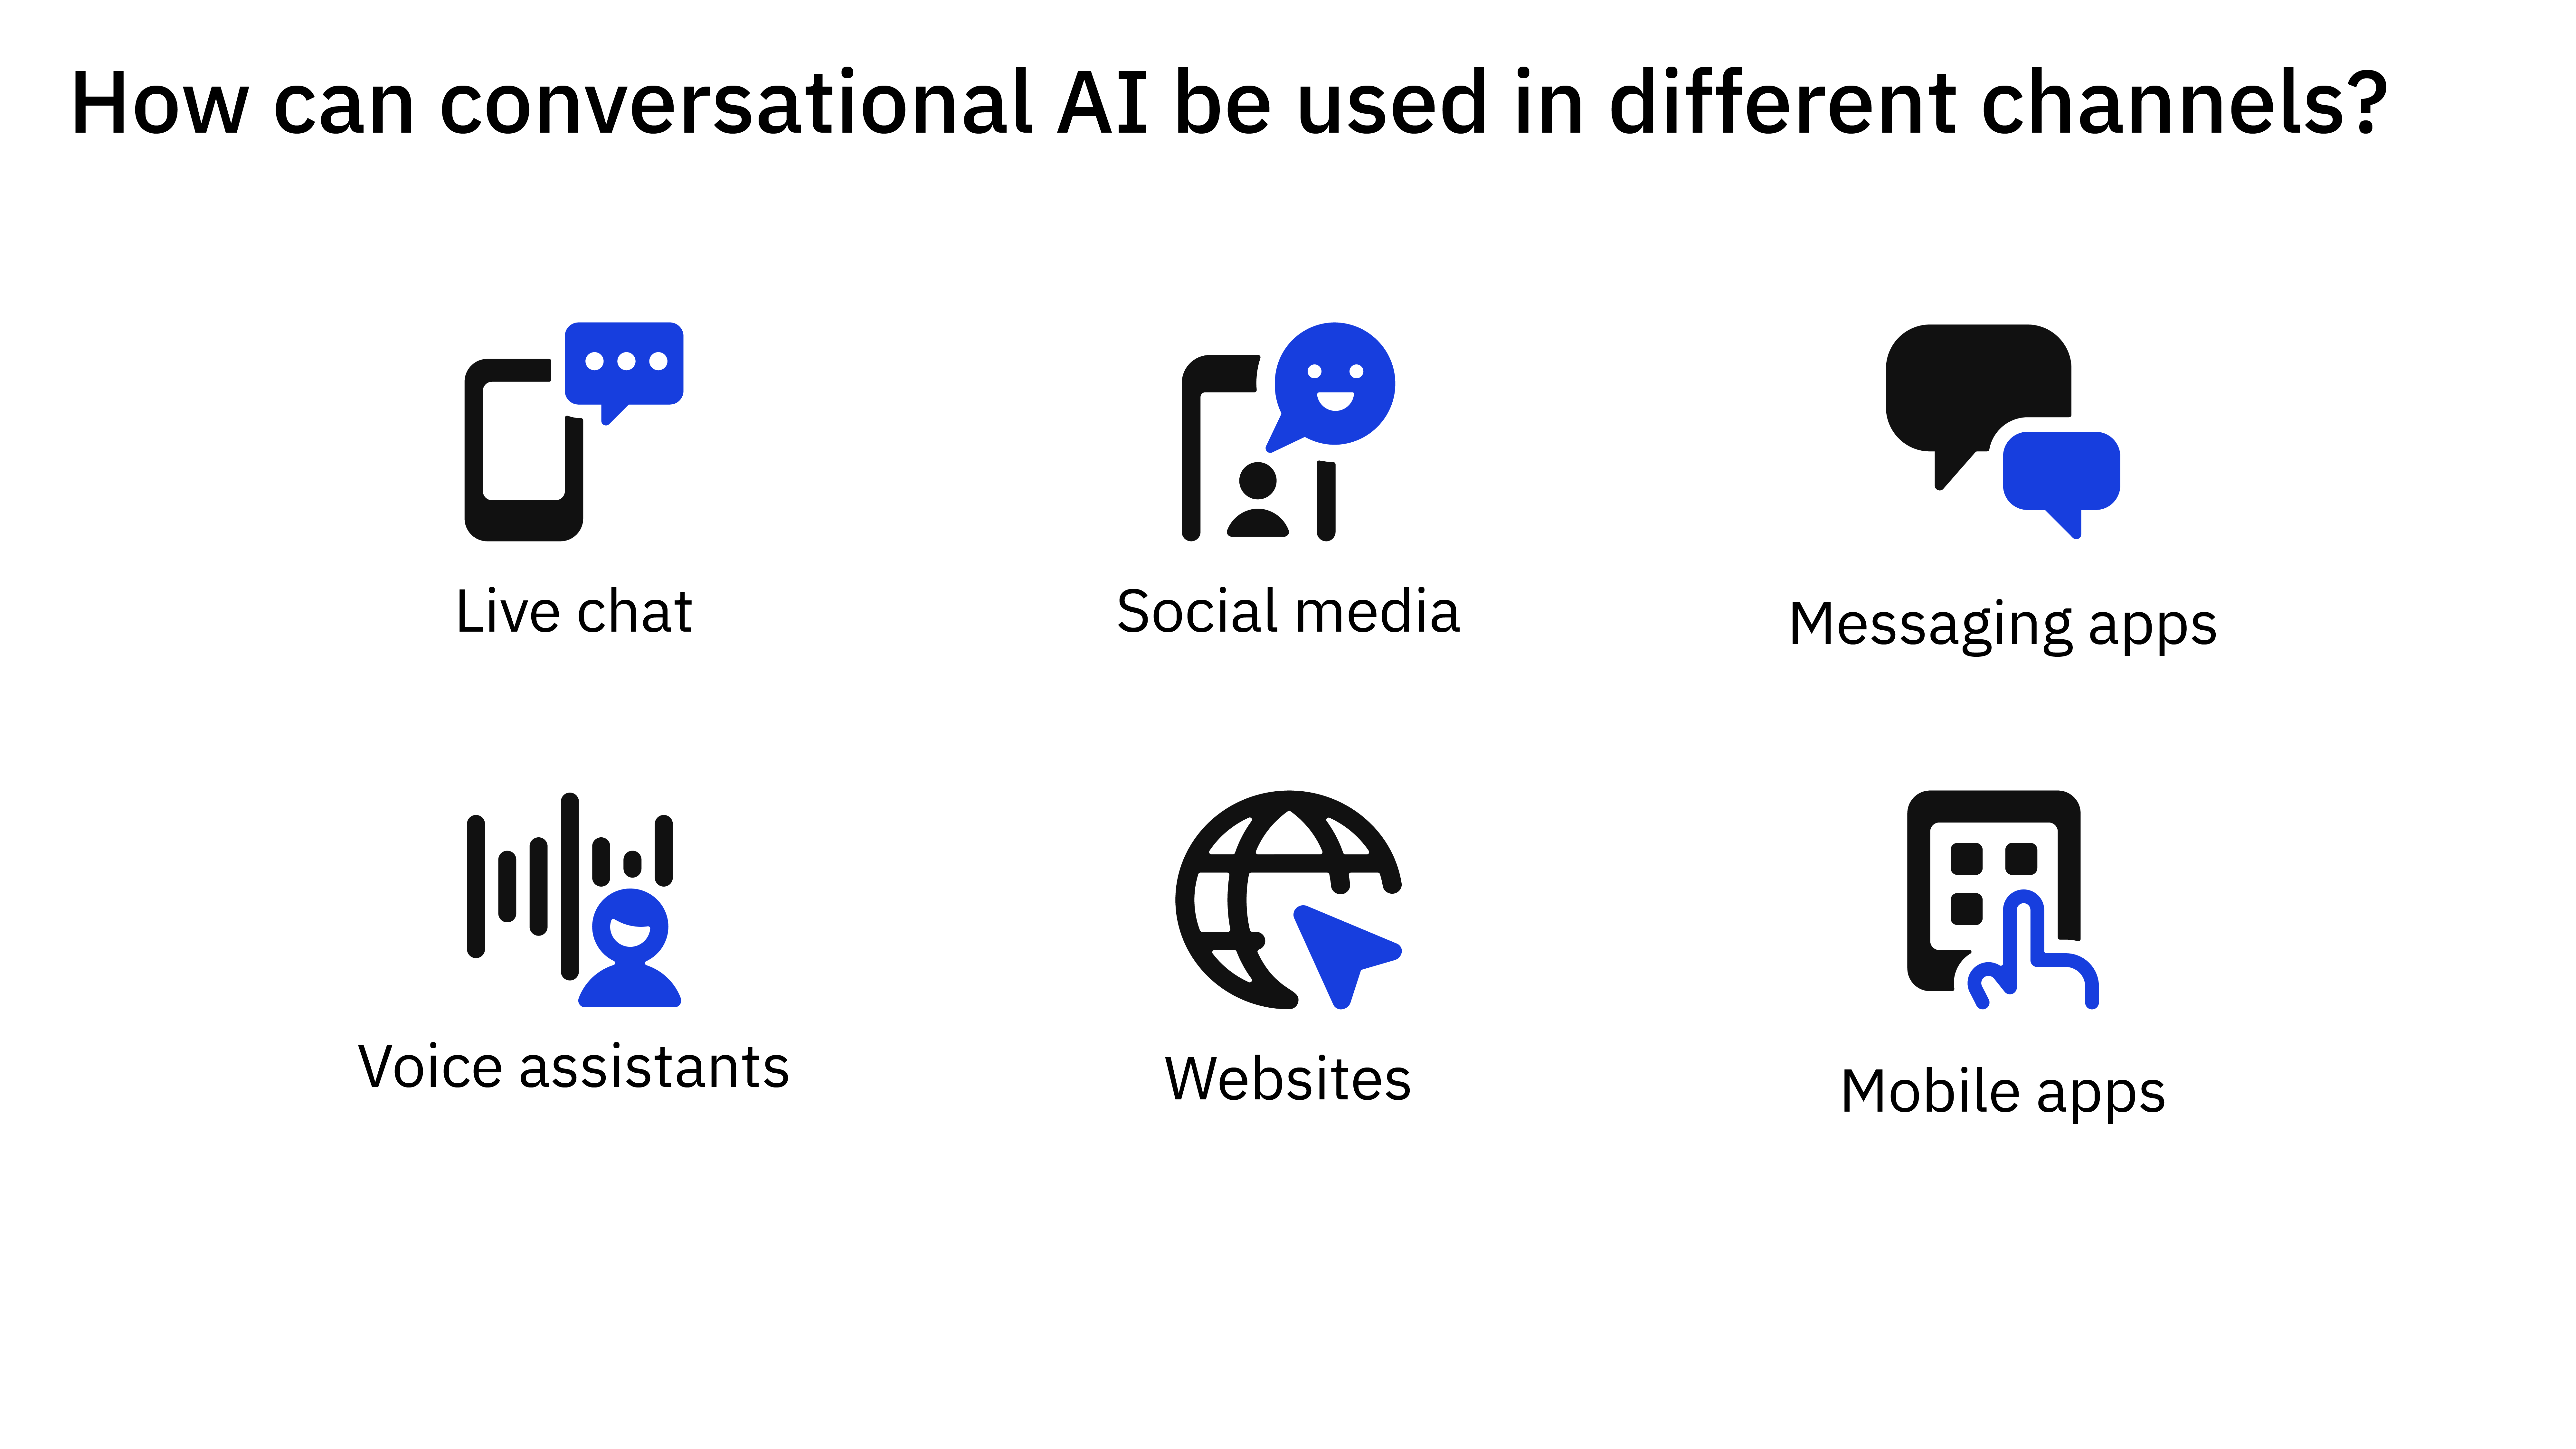 How can conversational AI be used in different channels?